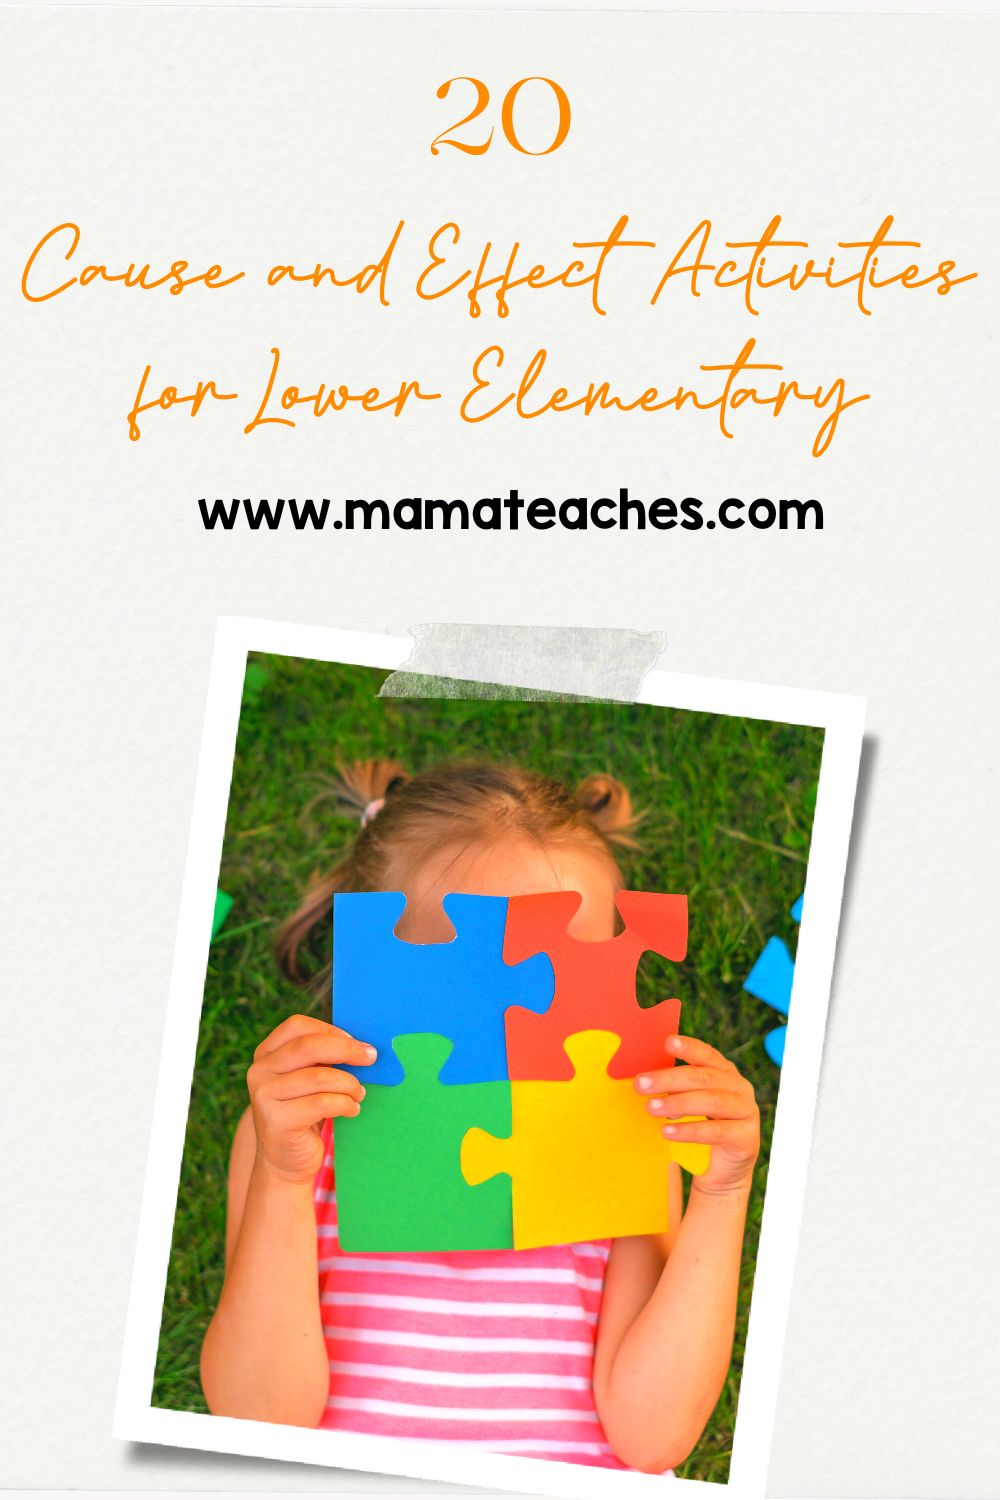 30 Cause and Effect Activities for Lower Elementary